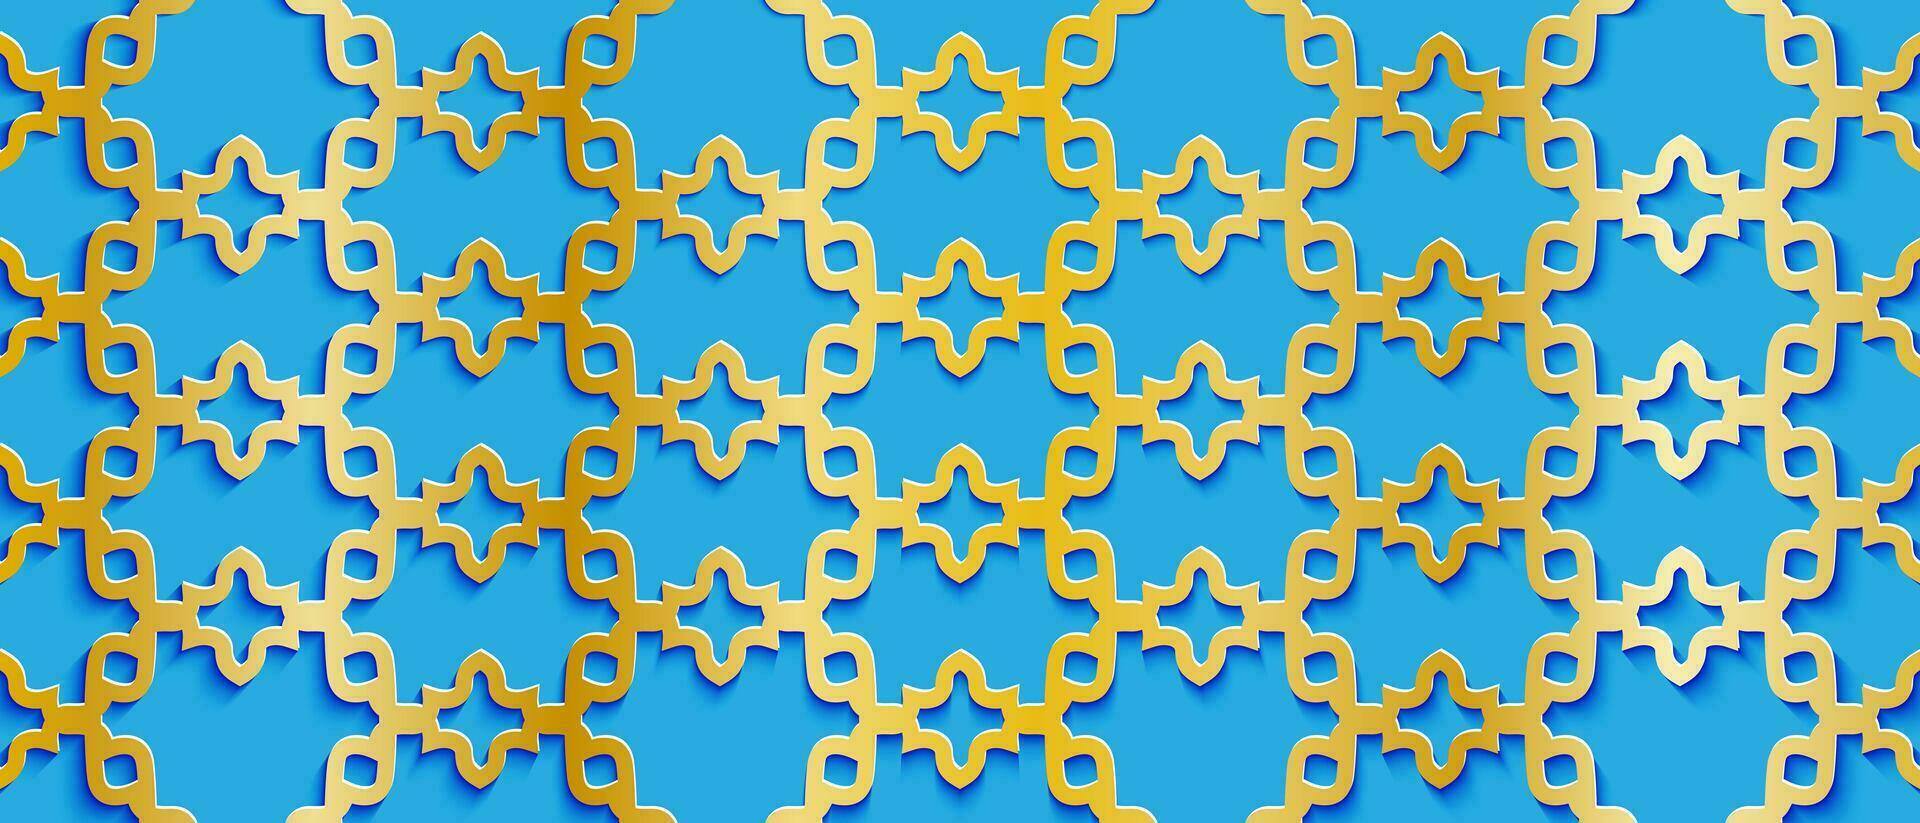 Background with arabic rich pattern. Texture of golden islamic ornament with shadow on a blue background. Vector illustration.